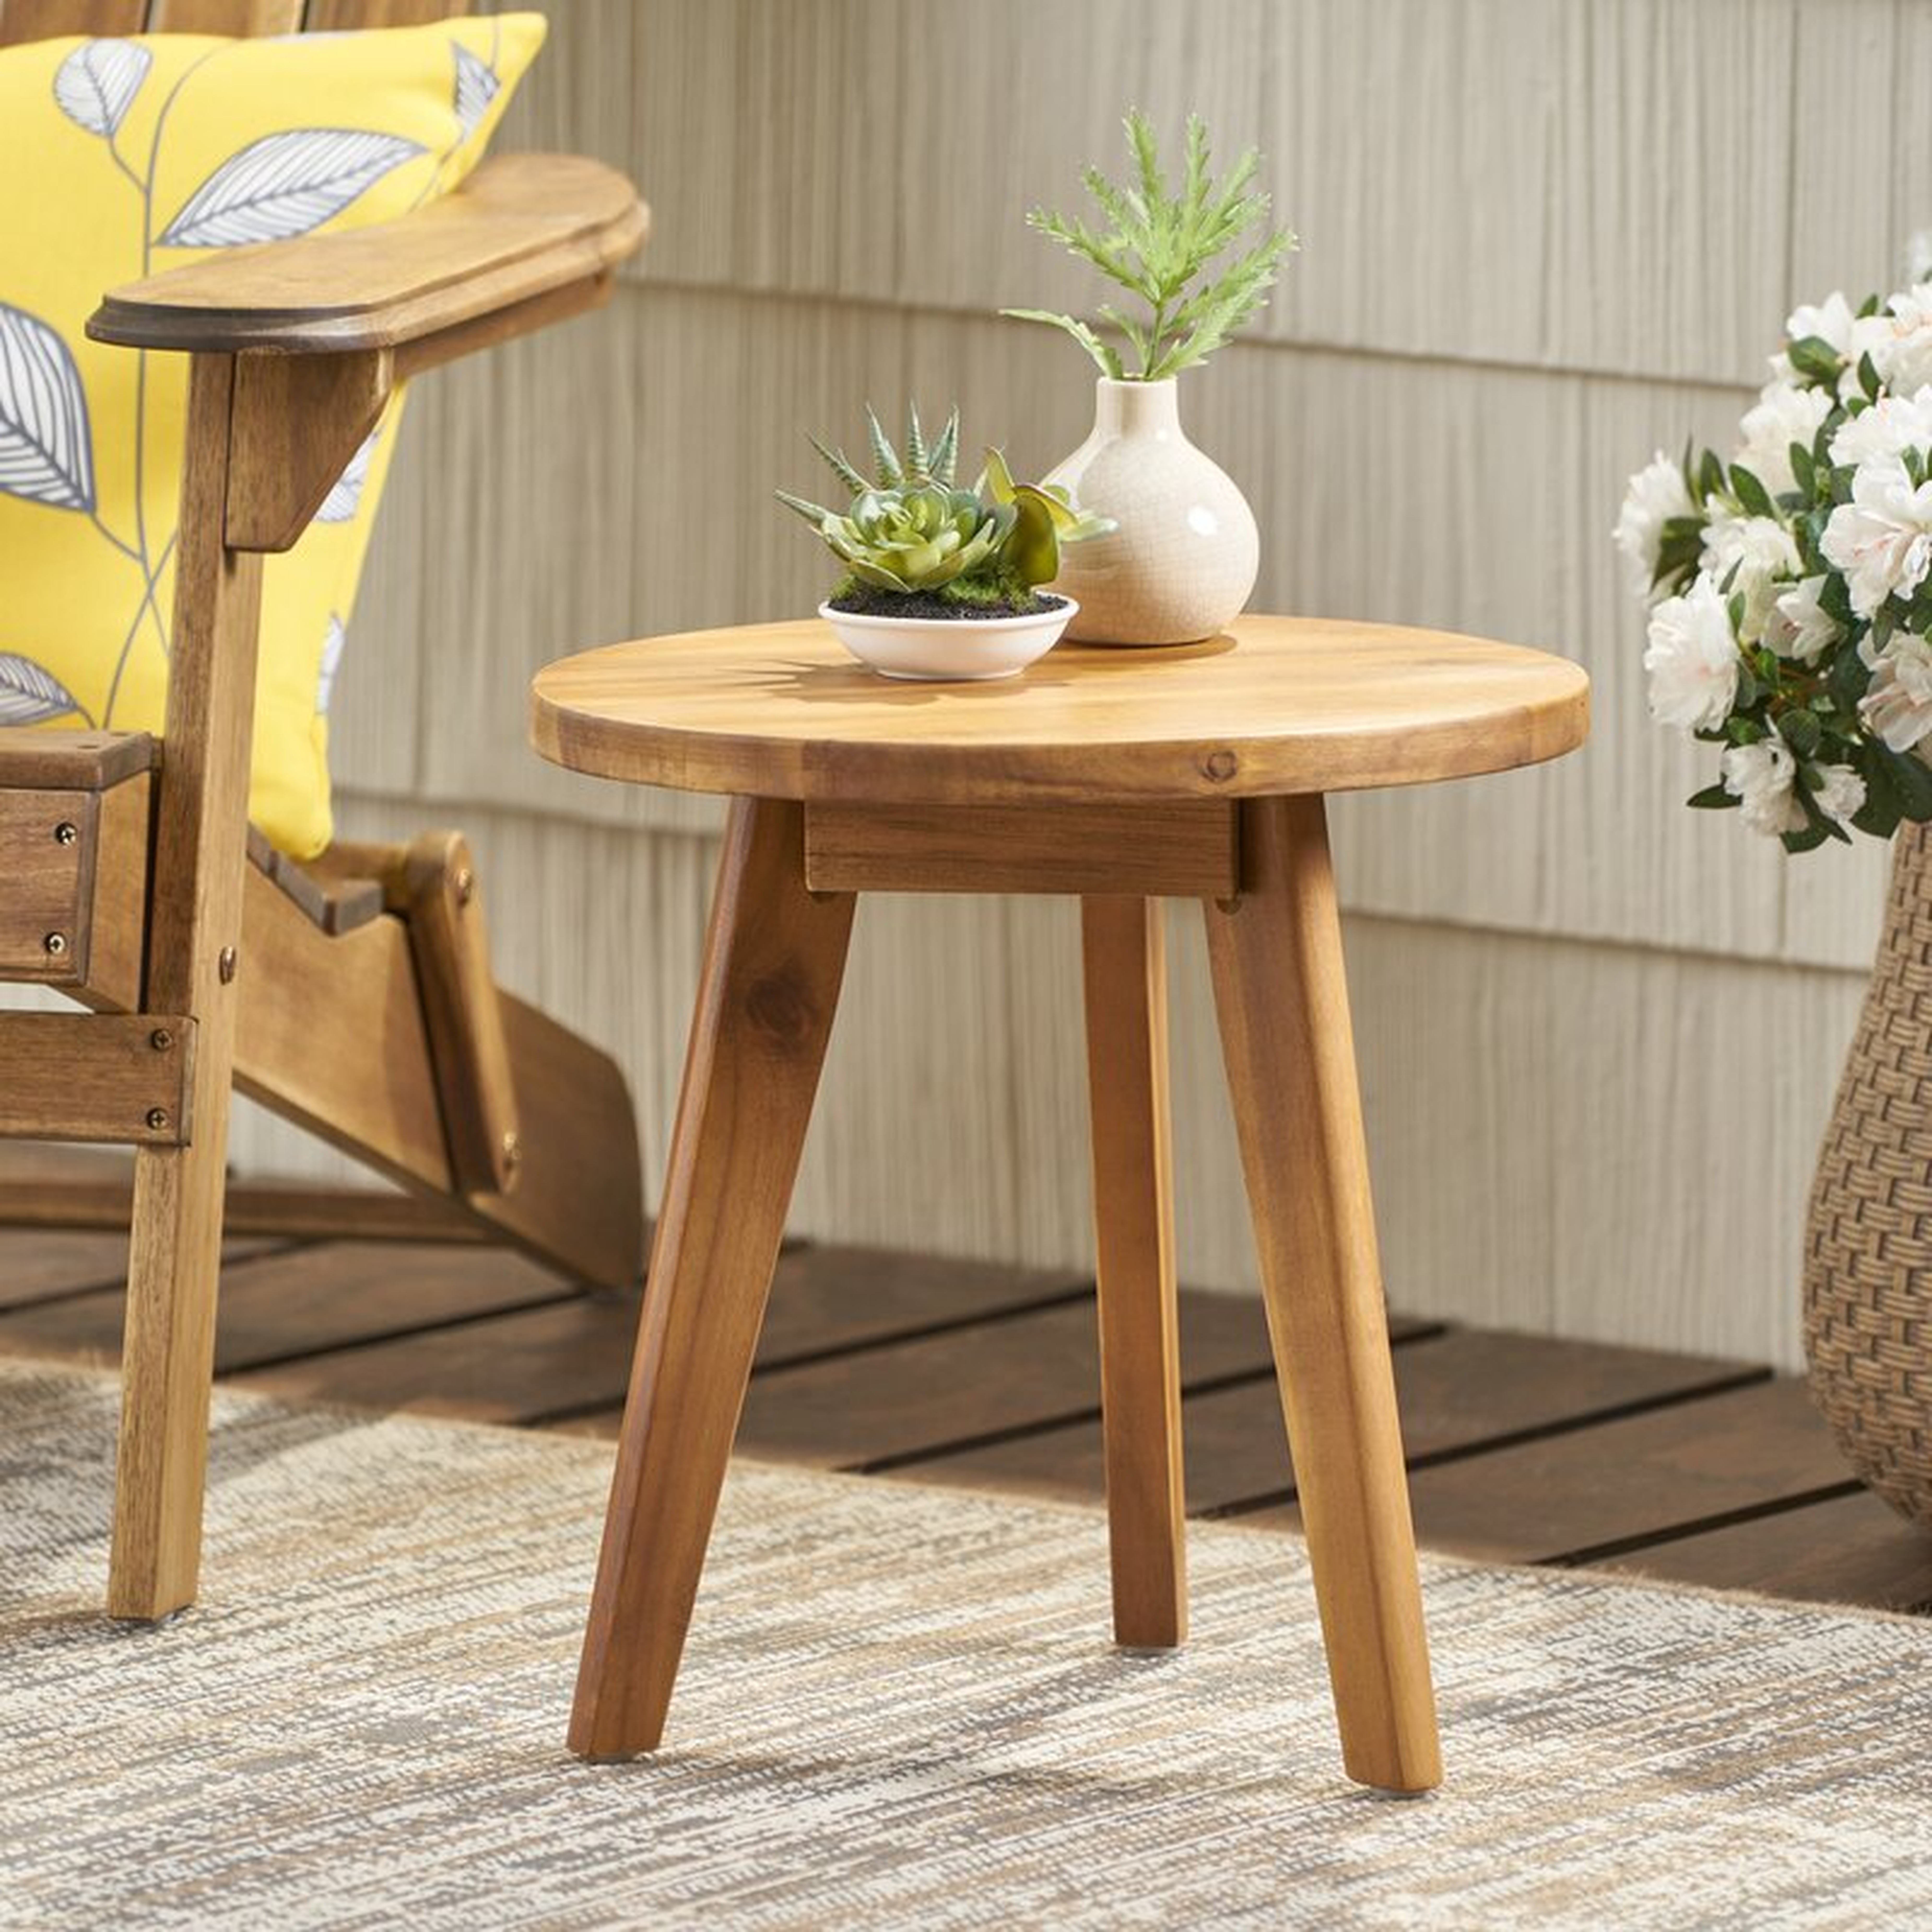 Humphries Solid Wood 3 Legs End Table, Natural - Wayfair